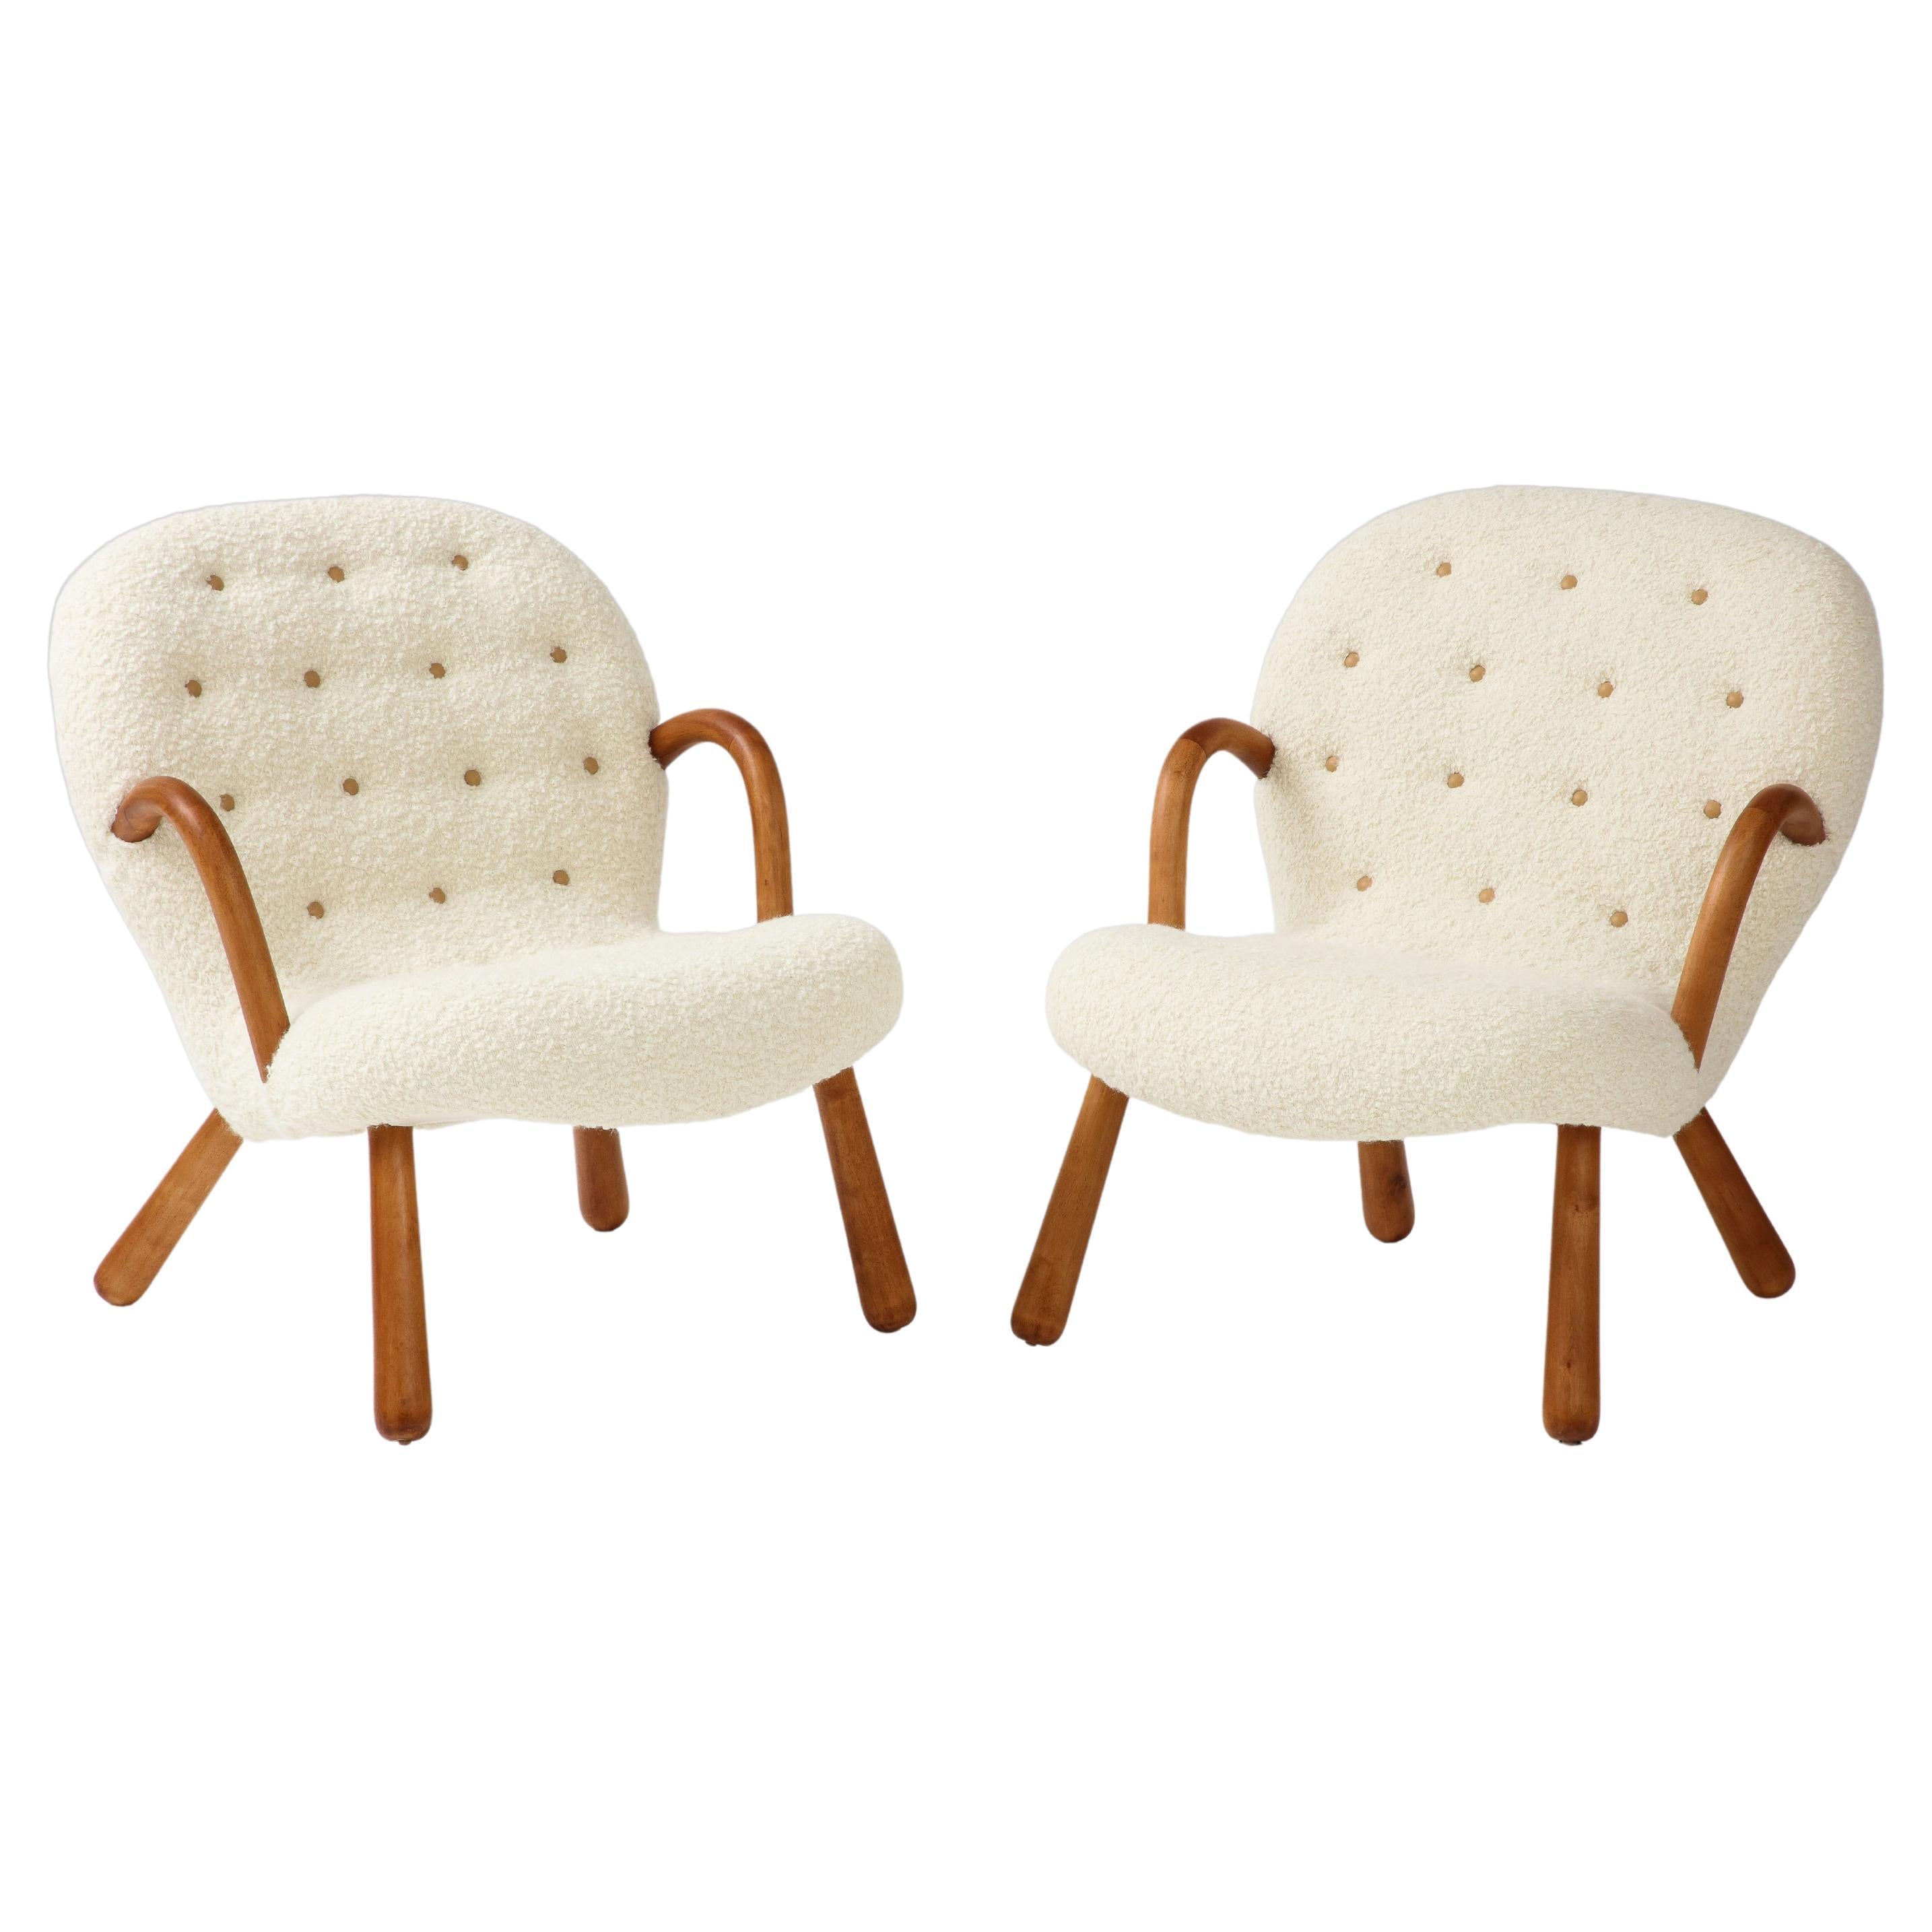 Arnold Madsen for Madsen & Schubell Rare Pair of Clam Chairs, Denmark, 1944